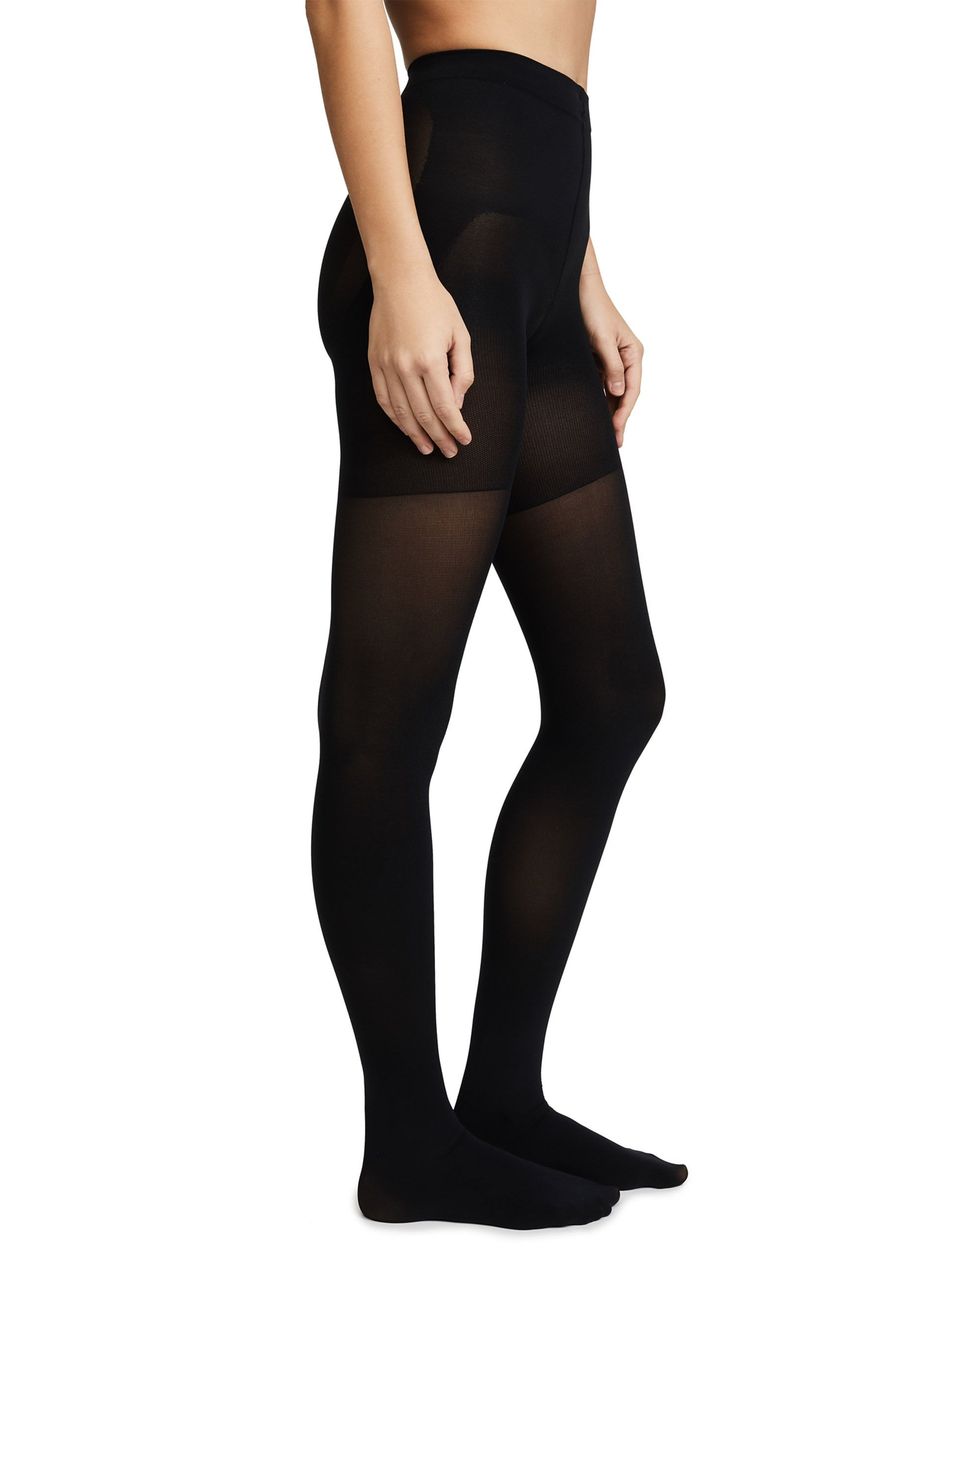 Black Tights for Women - 100D Opaque Warm Winter Pantyhose Size small 5'3